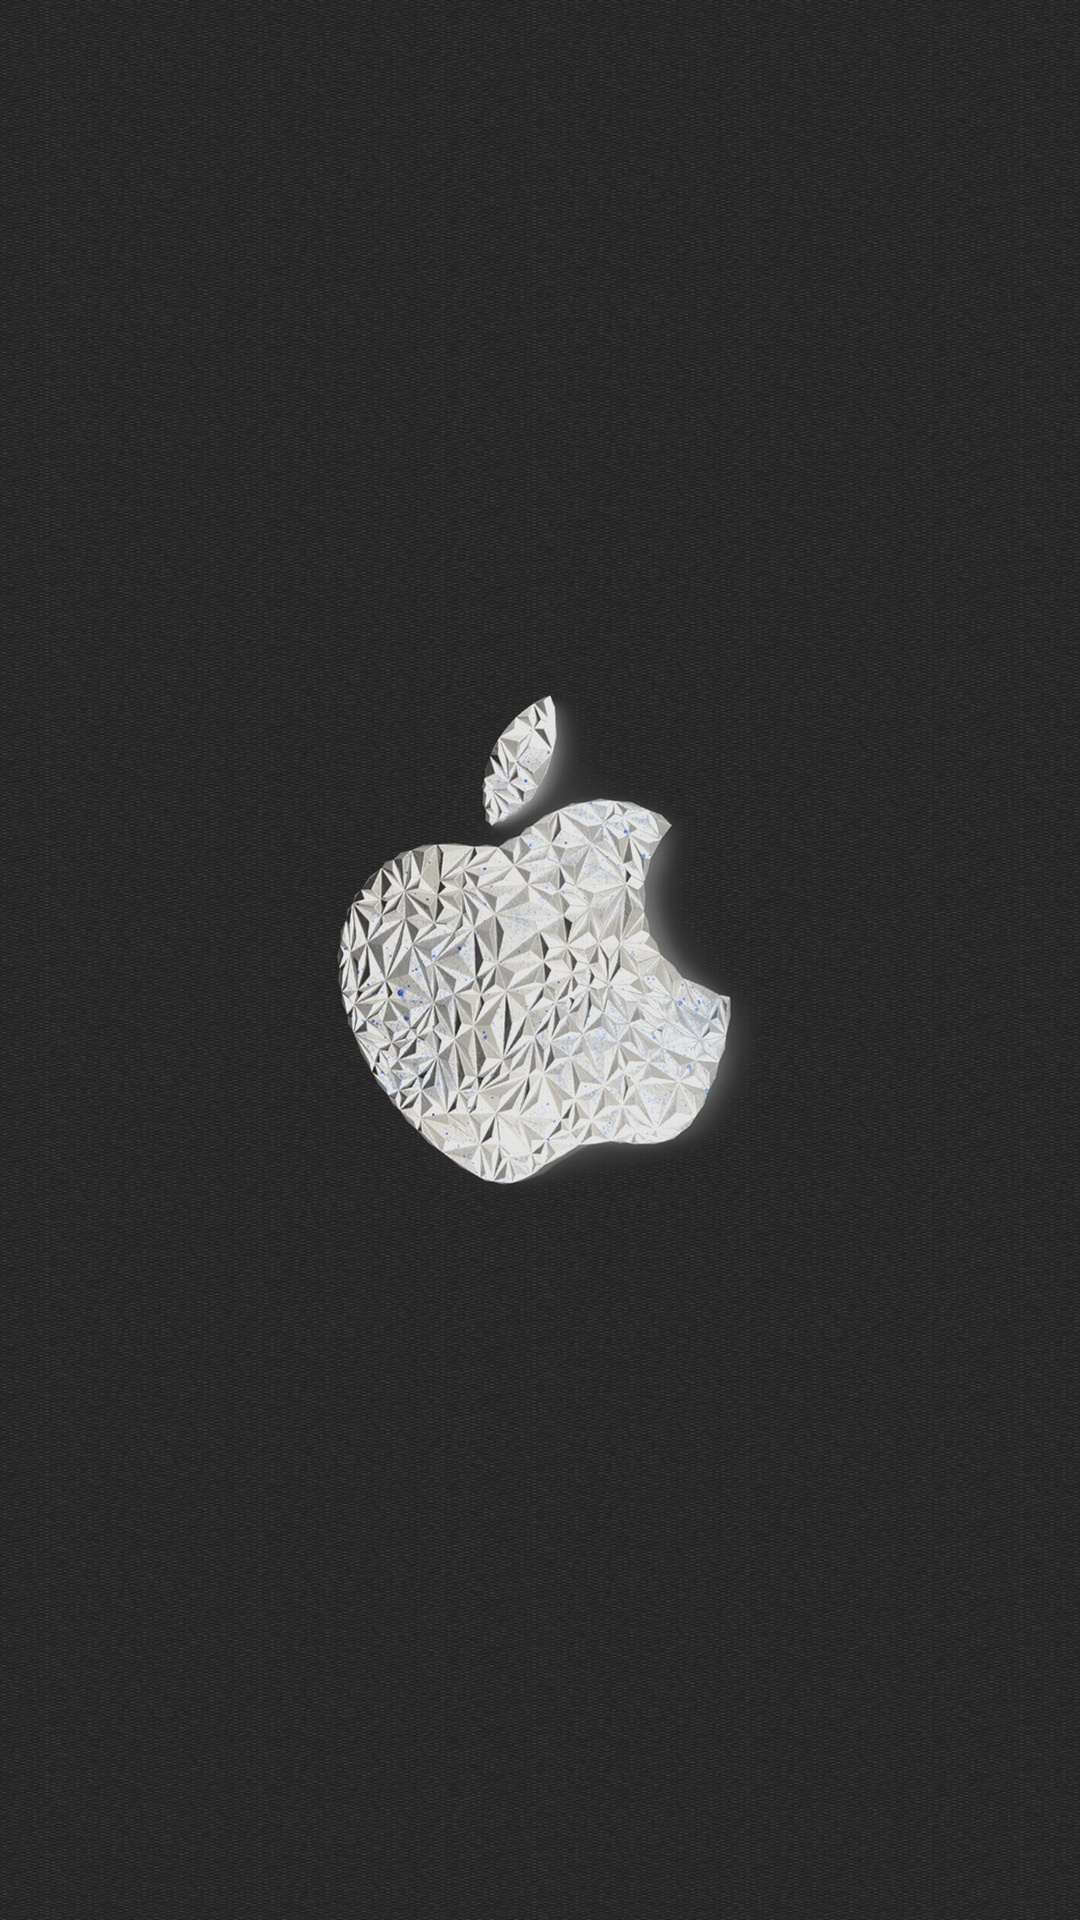 1080x1920 Apple Logo Bw Iphone 7,6s,6 Plus, Pixel xl ,One Plus 3,3t,5 HD 4k  Wallpapers, Images, Backgrounds, Photos and Pictures